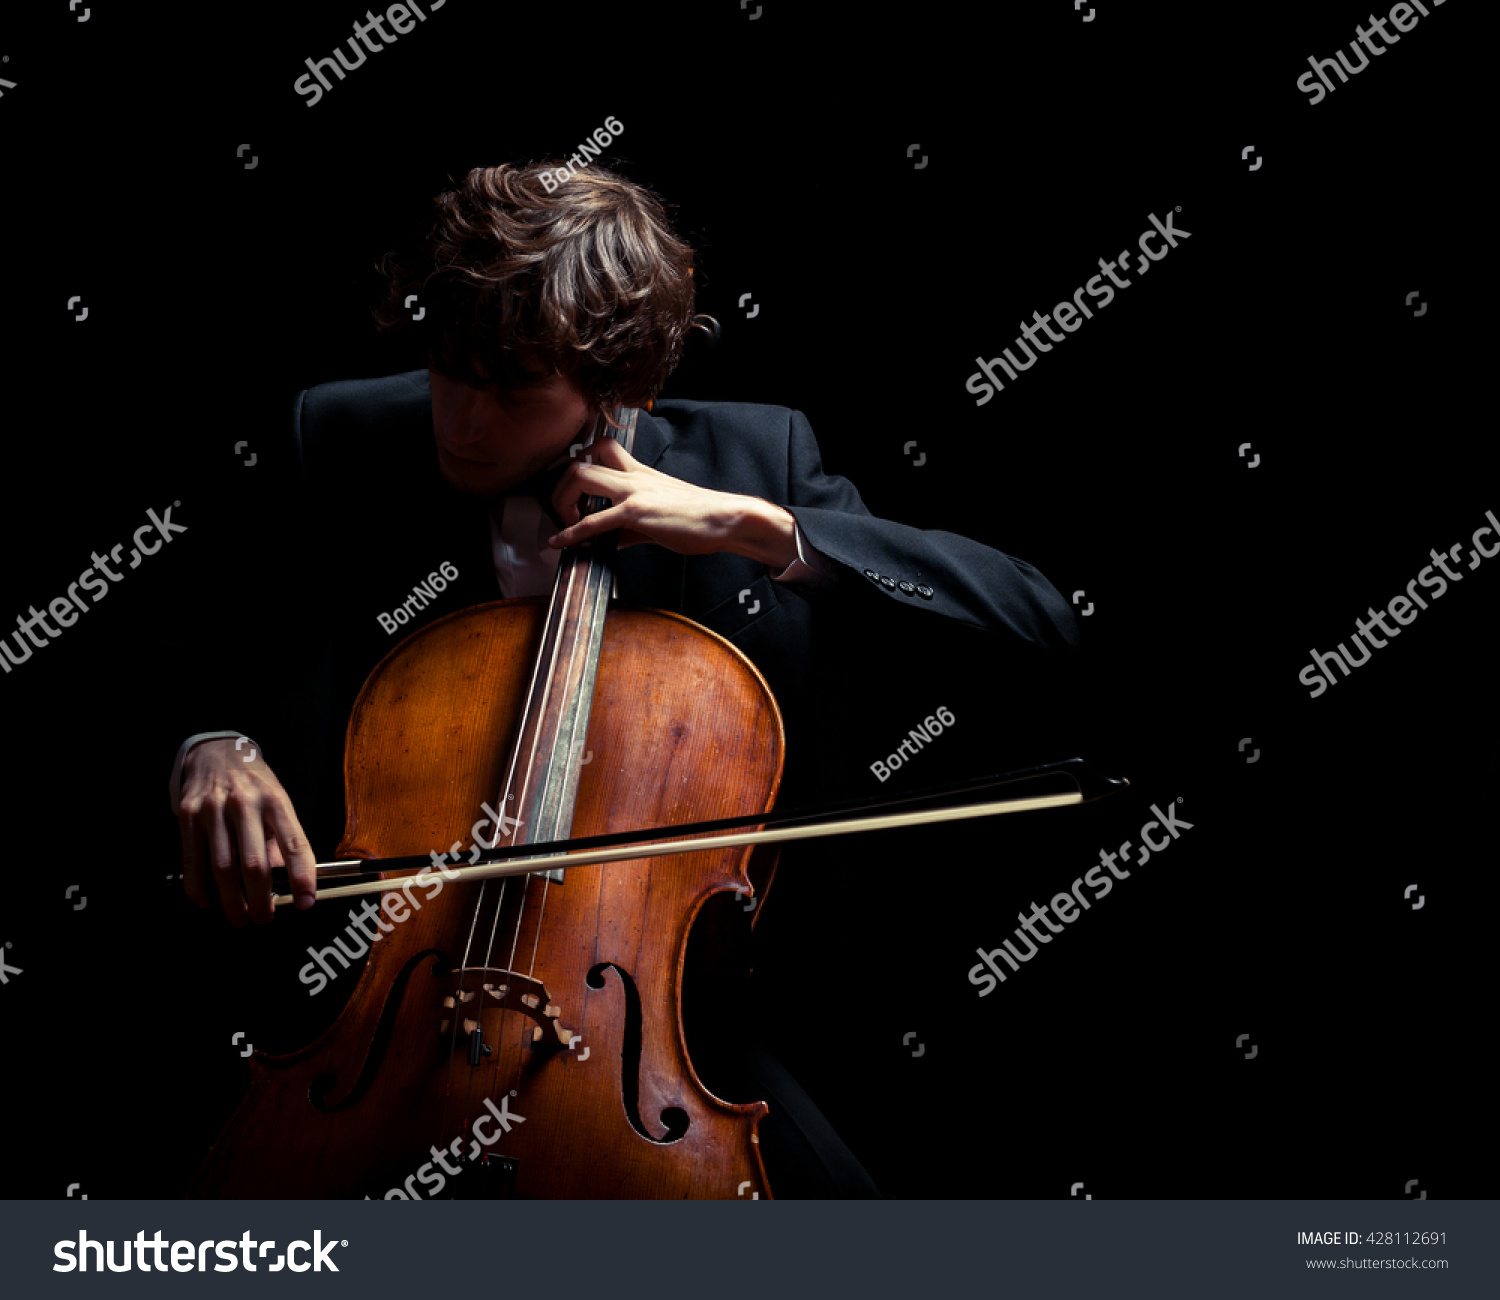 musician playing the cello. Black background #428112691